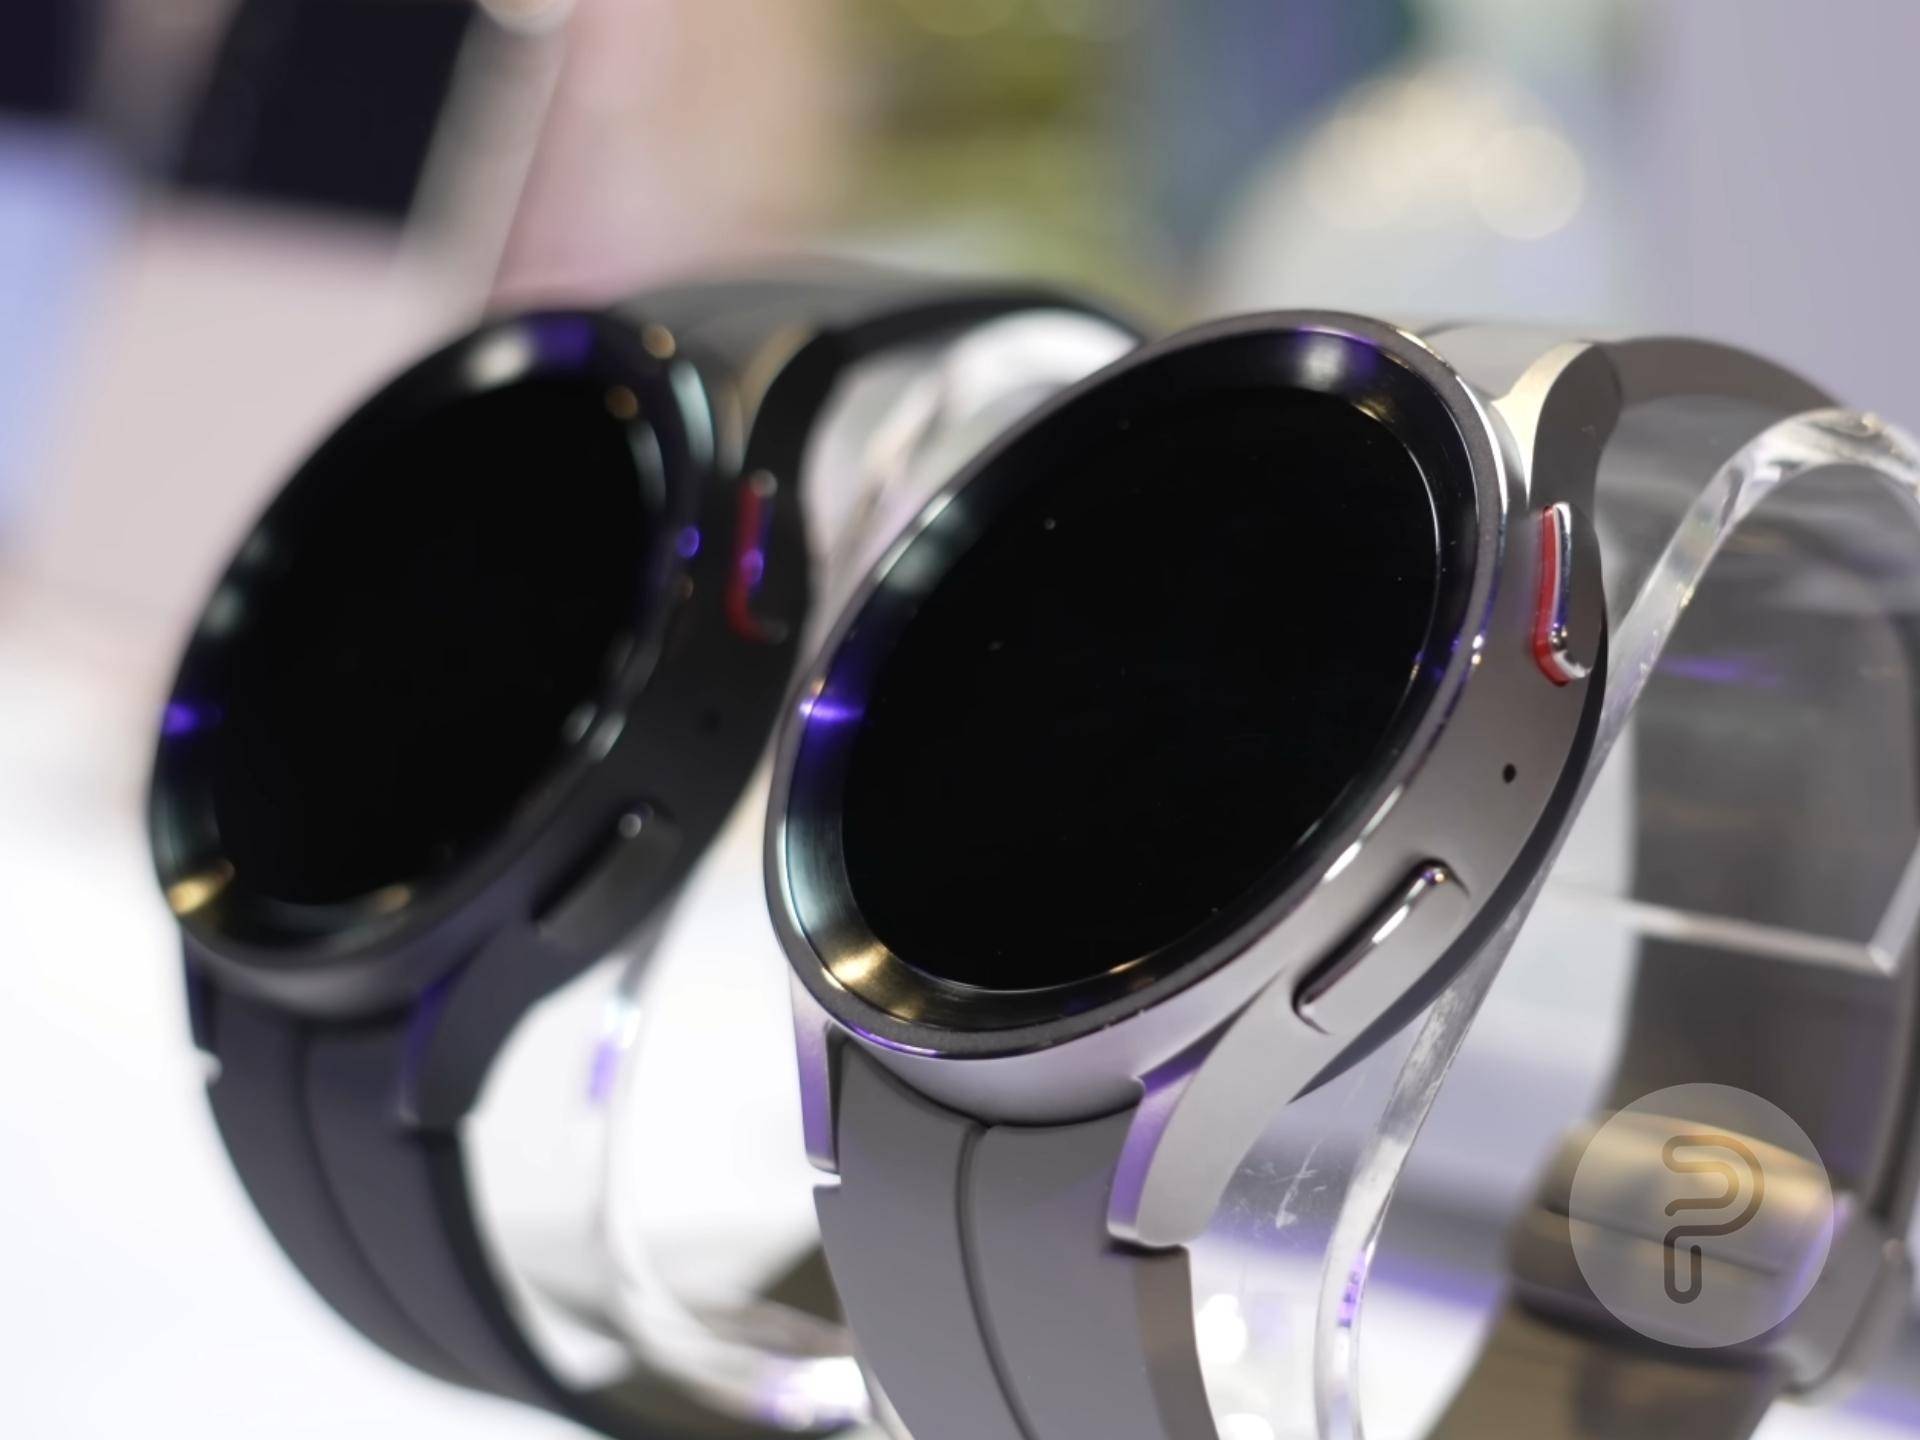 Galaxy Watch 5 Pro in Gray Titanium with Black Titanium variant in the background;  both placed on a clock stand